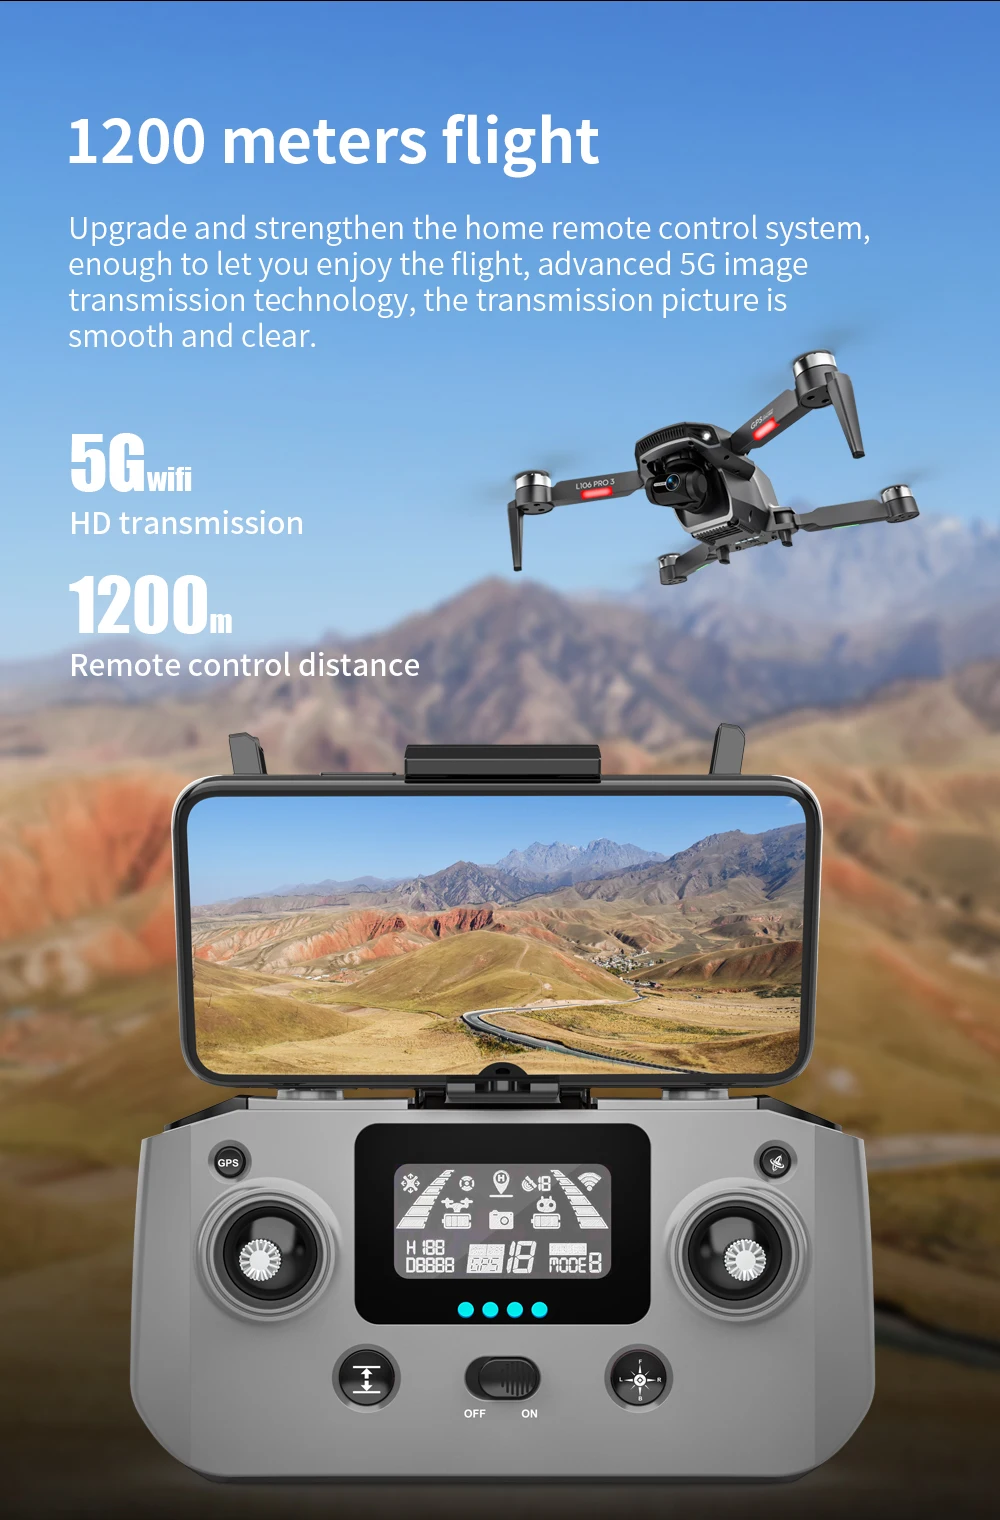 L106 Pro 3 Drone, 5G image transmission technology, the transmission picture is smooth and clear . 1200 meters flight